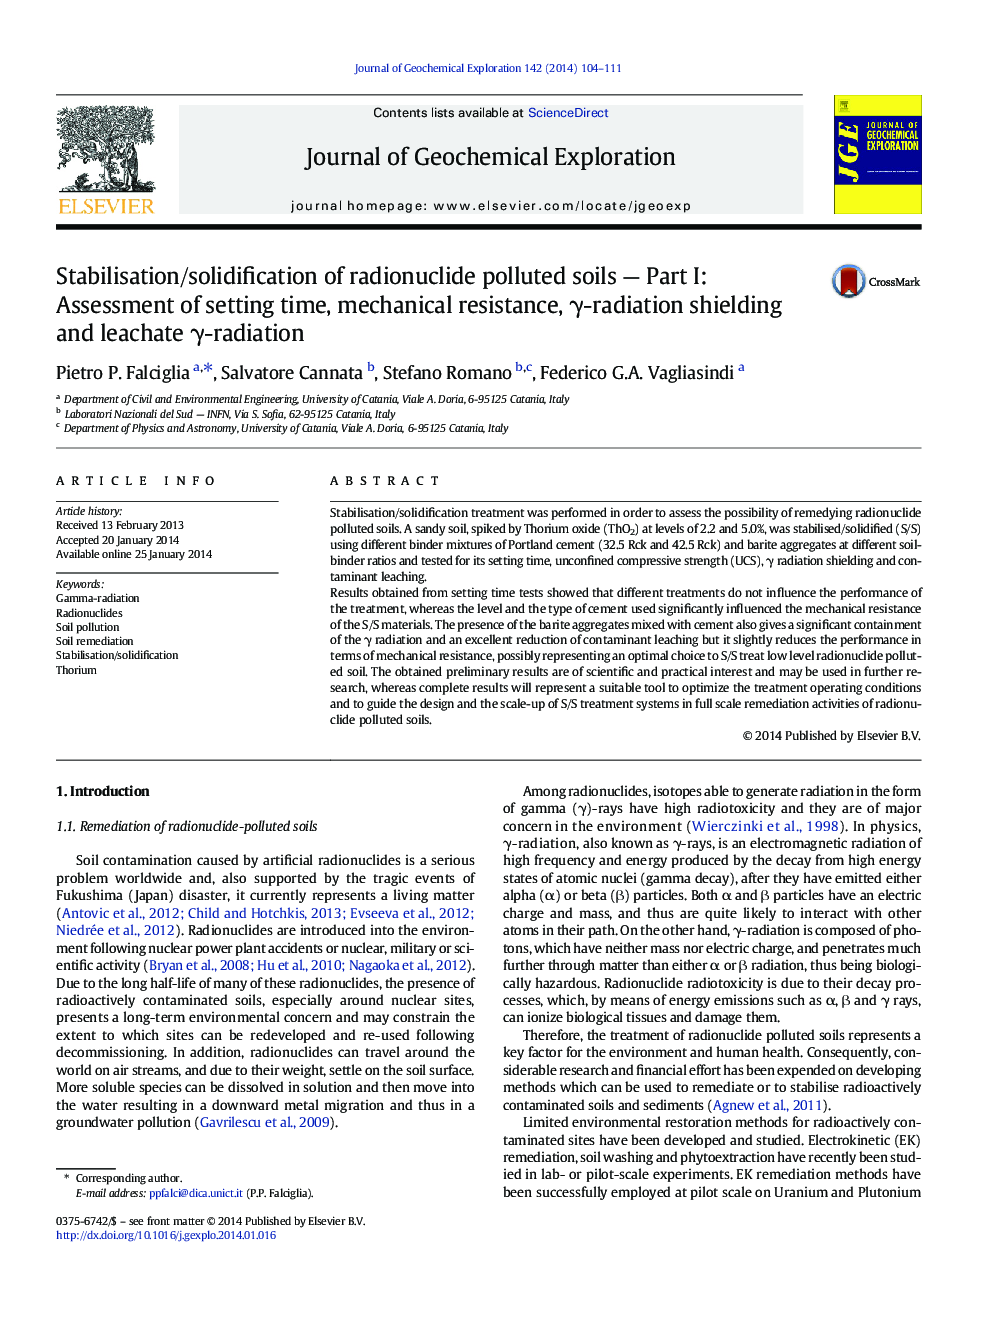 Stabilisation/solidification of radionuclide polluted soils — Part I: Assessment of setting time, mechanical resistance, γ-radiation shielding and leachate γ-radiation